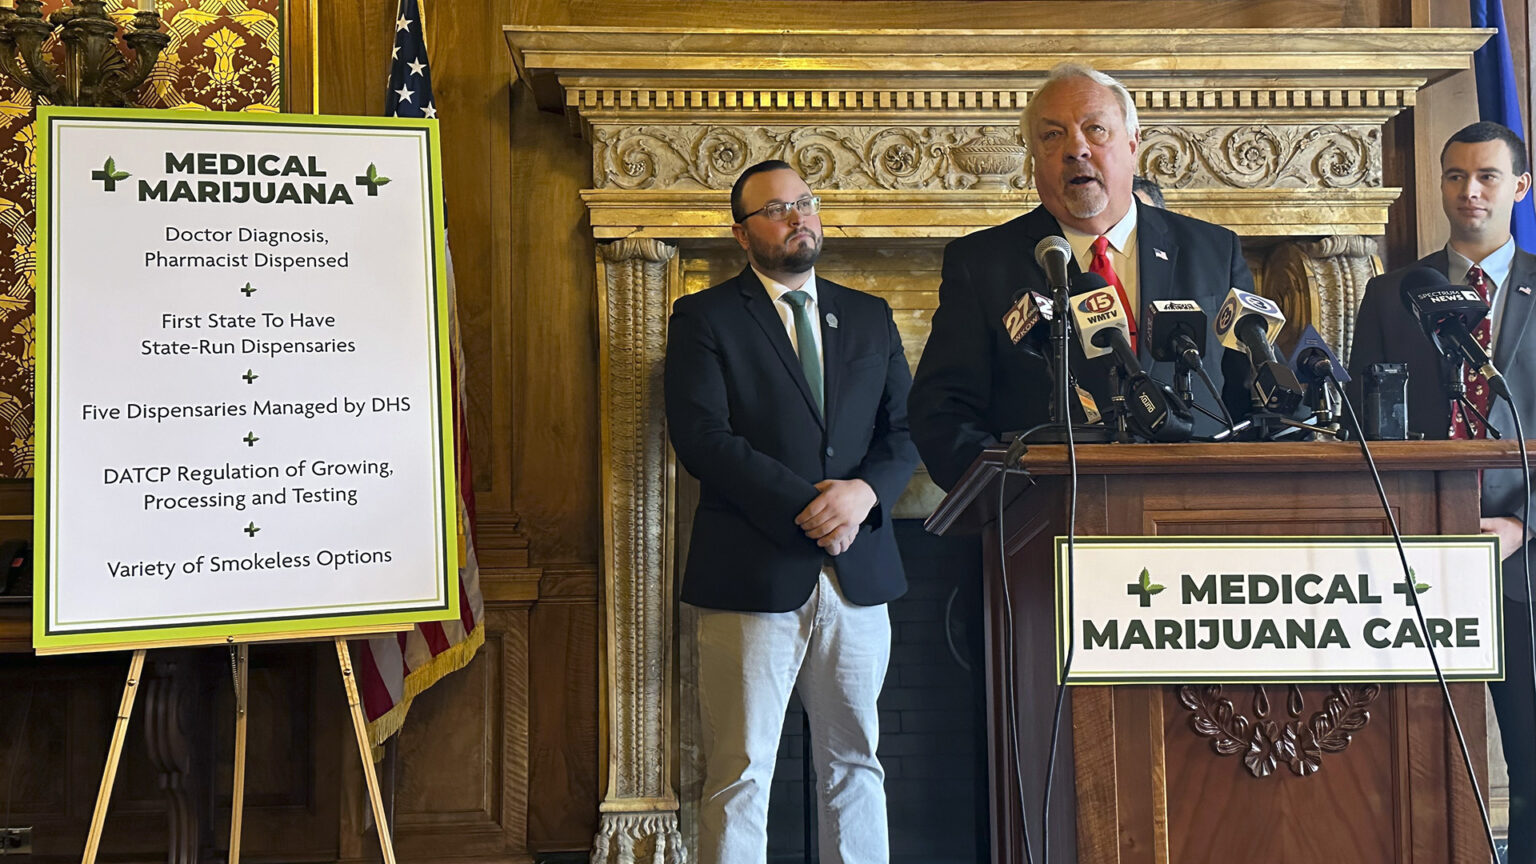 Jon Plumer stands and speaks into multiple microphones mounted to a wood podium with a sign affixed to its front reading Medical Marijuana Care and another sign to his side reading Medical Marijuana, Doctor Diagnosis, Pharmacist Dispensed, First State To Have State-Run Dispensaries, Five Dispensaries Managed by DHS, DATCP Regulation of Growing, Processing and Testing, and Variety of Smokeless Options, with two other people standing behind him in a room with a carved fireplace lintel, the U.S. and Wisconsin flags, and toile wallpaper.